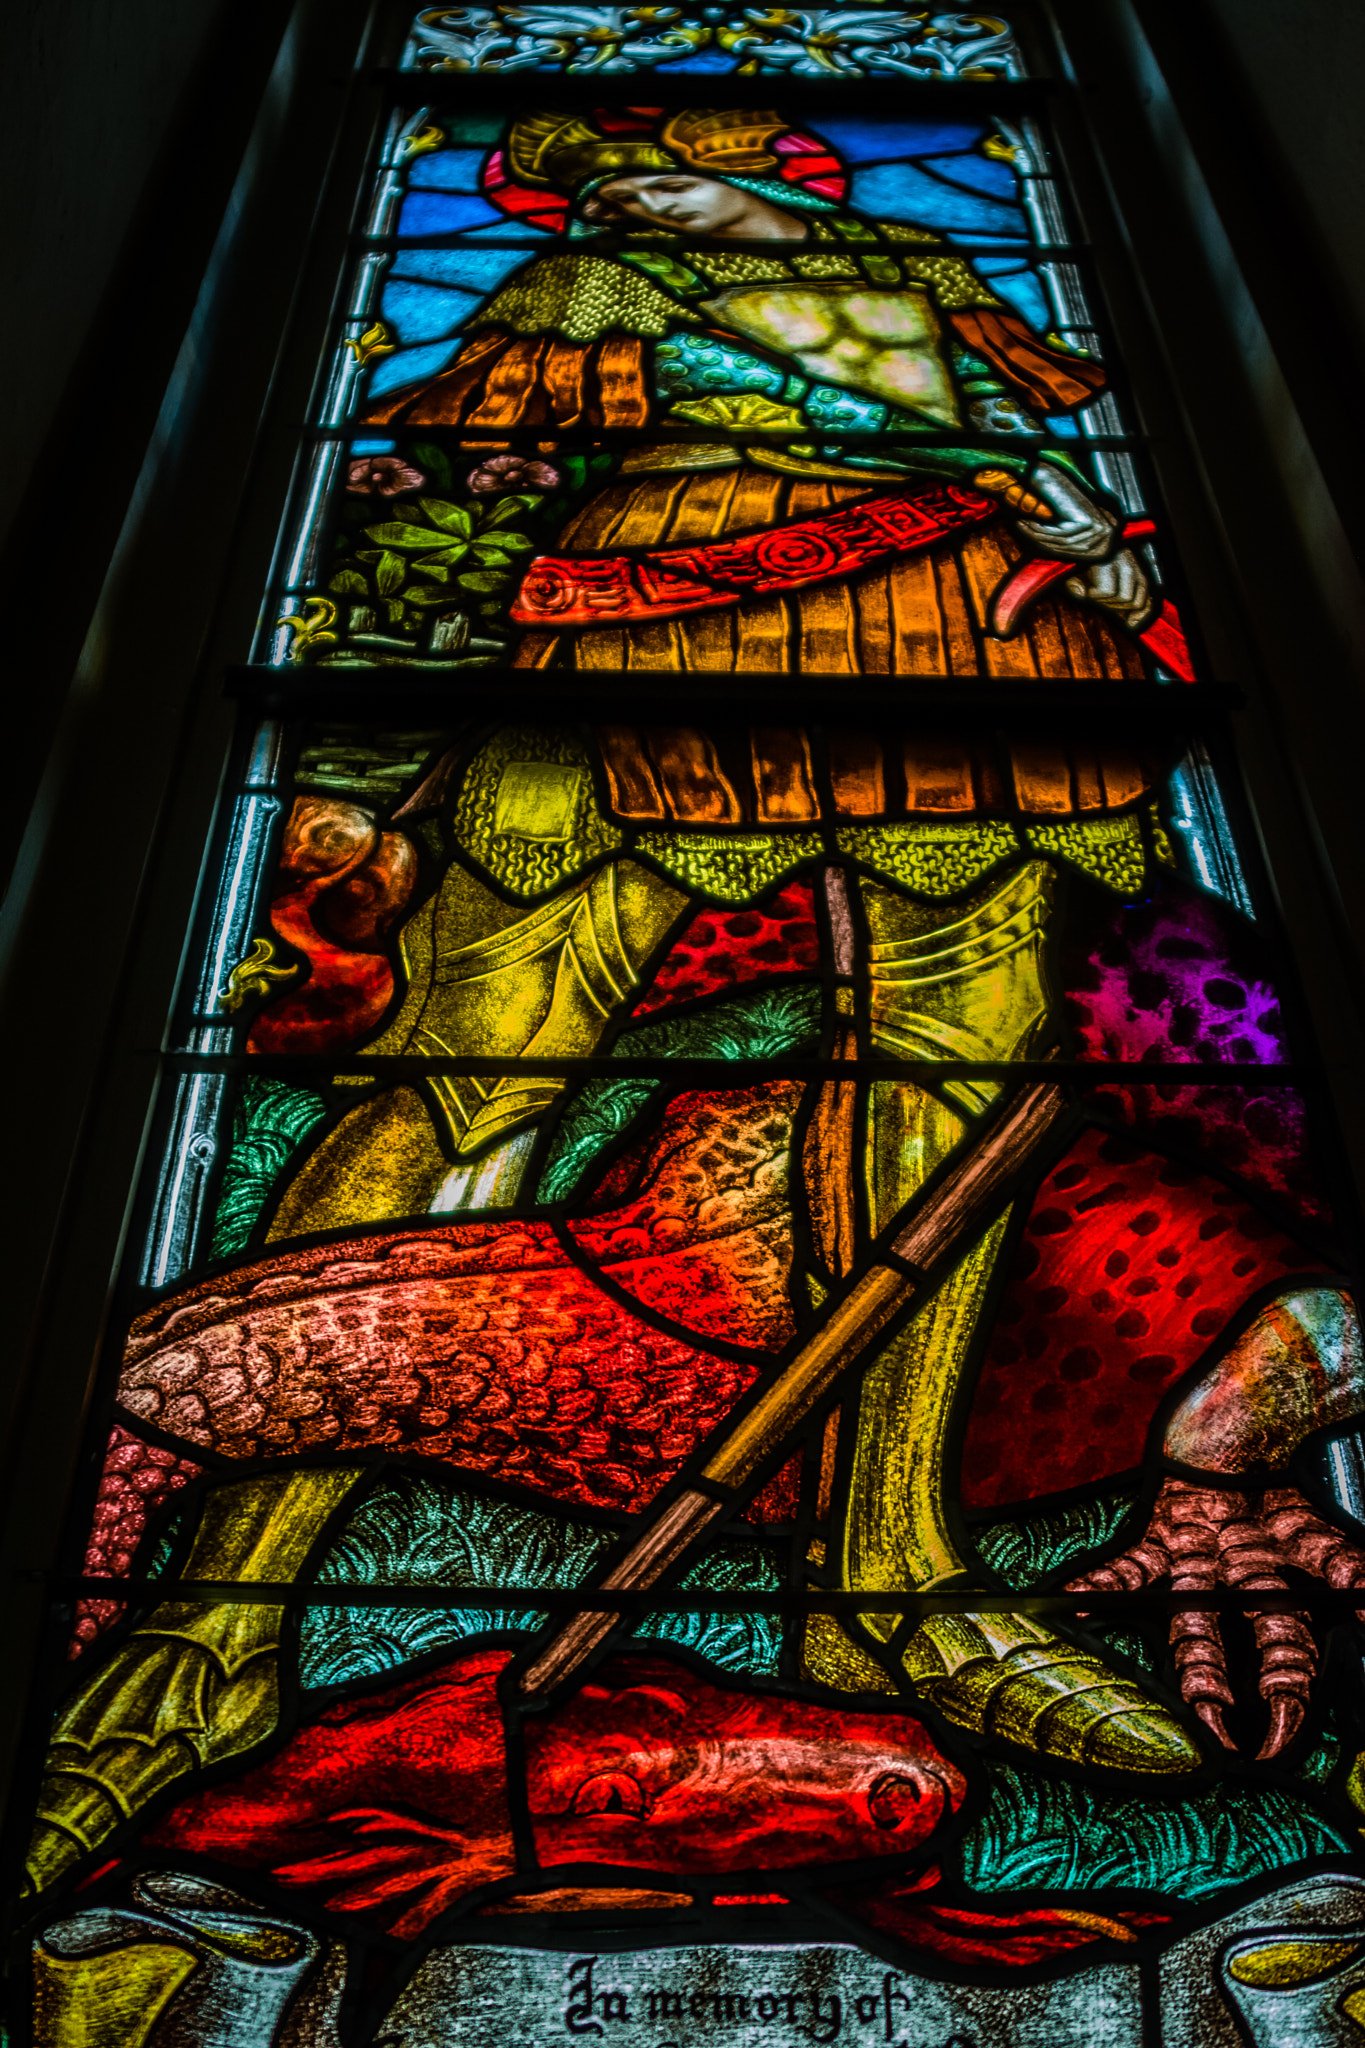 Nikon D7100 + Sigma 28-200mm F3.5-5.6 Compact Aspherical Hyperzoom Macro sample photo. Stain glass window photography